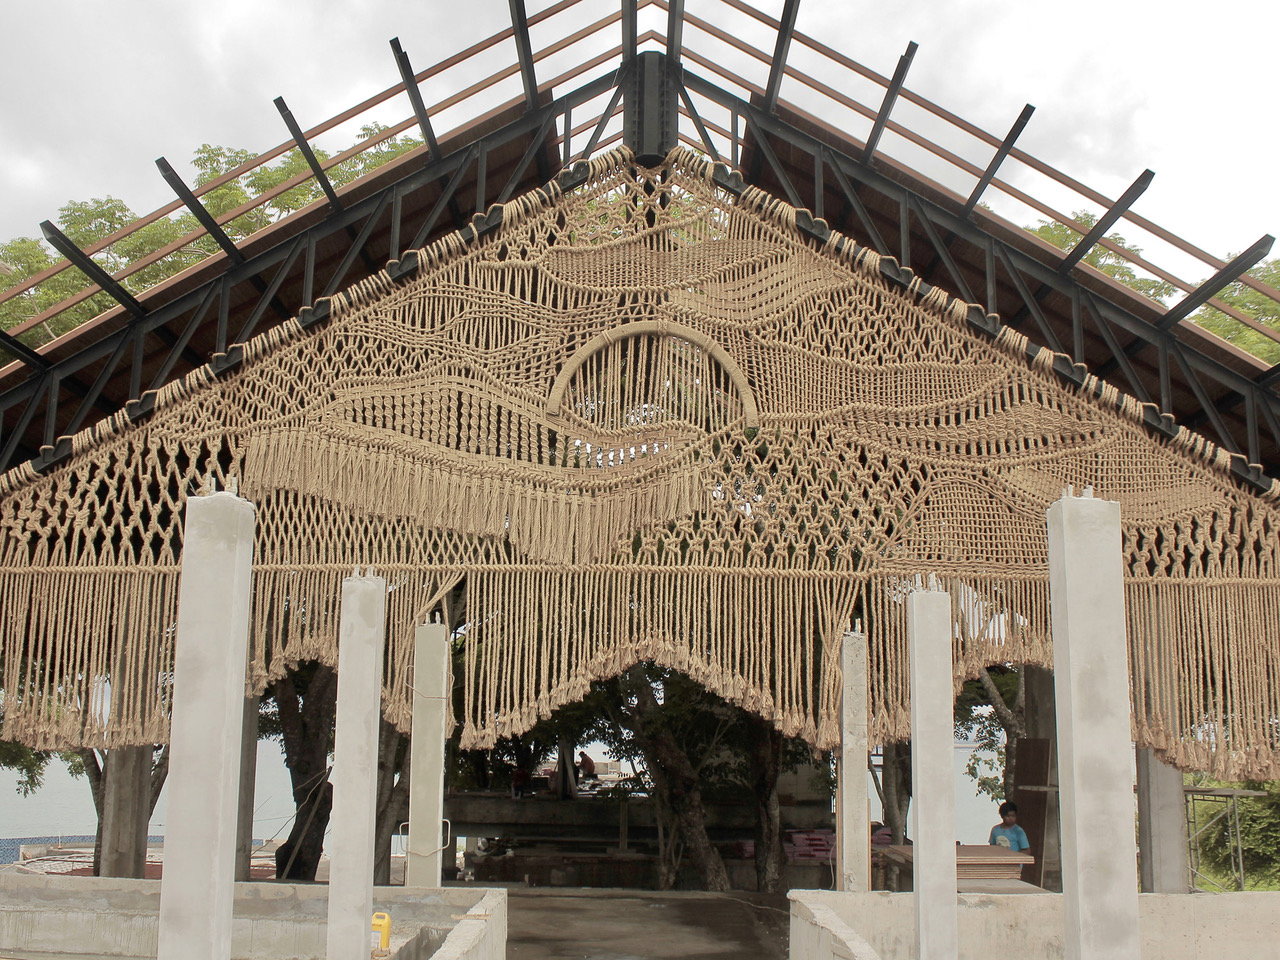 Agnes Hansella's intricate macrame wall hangings for Locca Beach House Bali. 